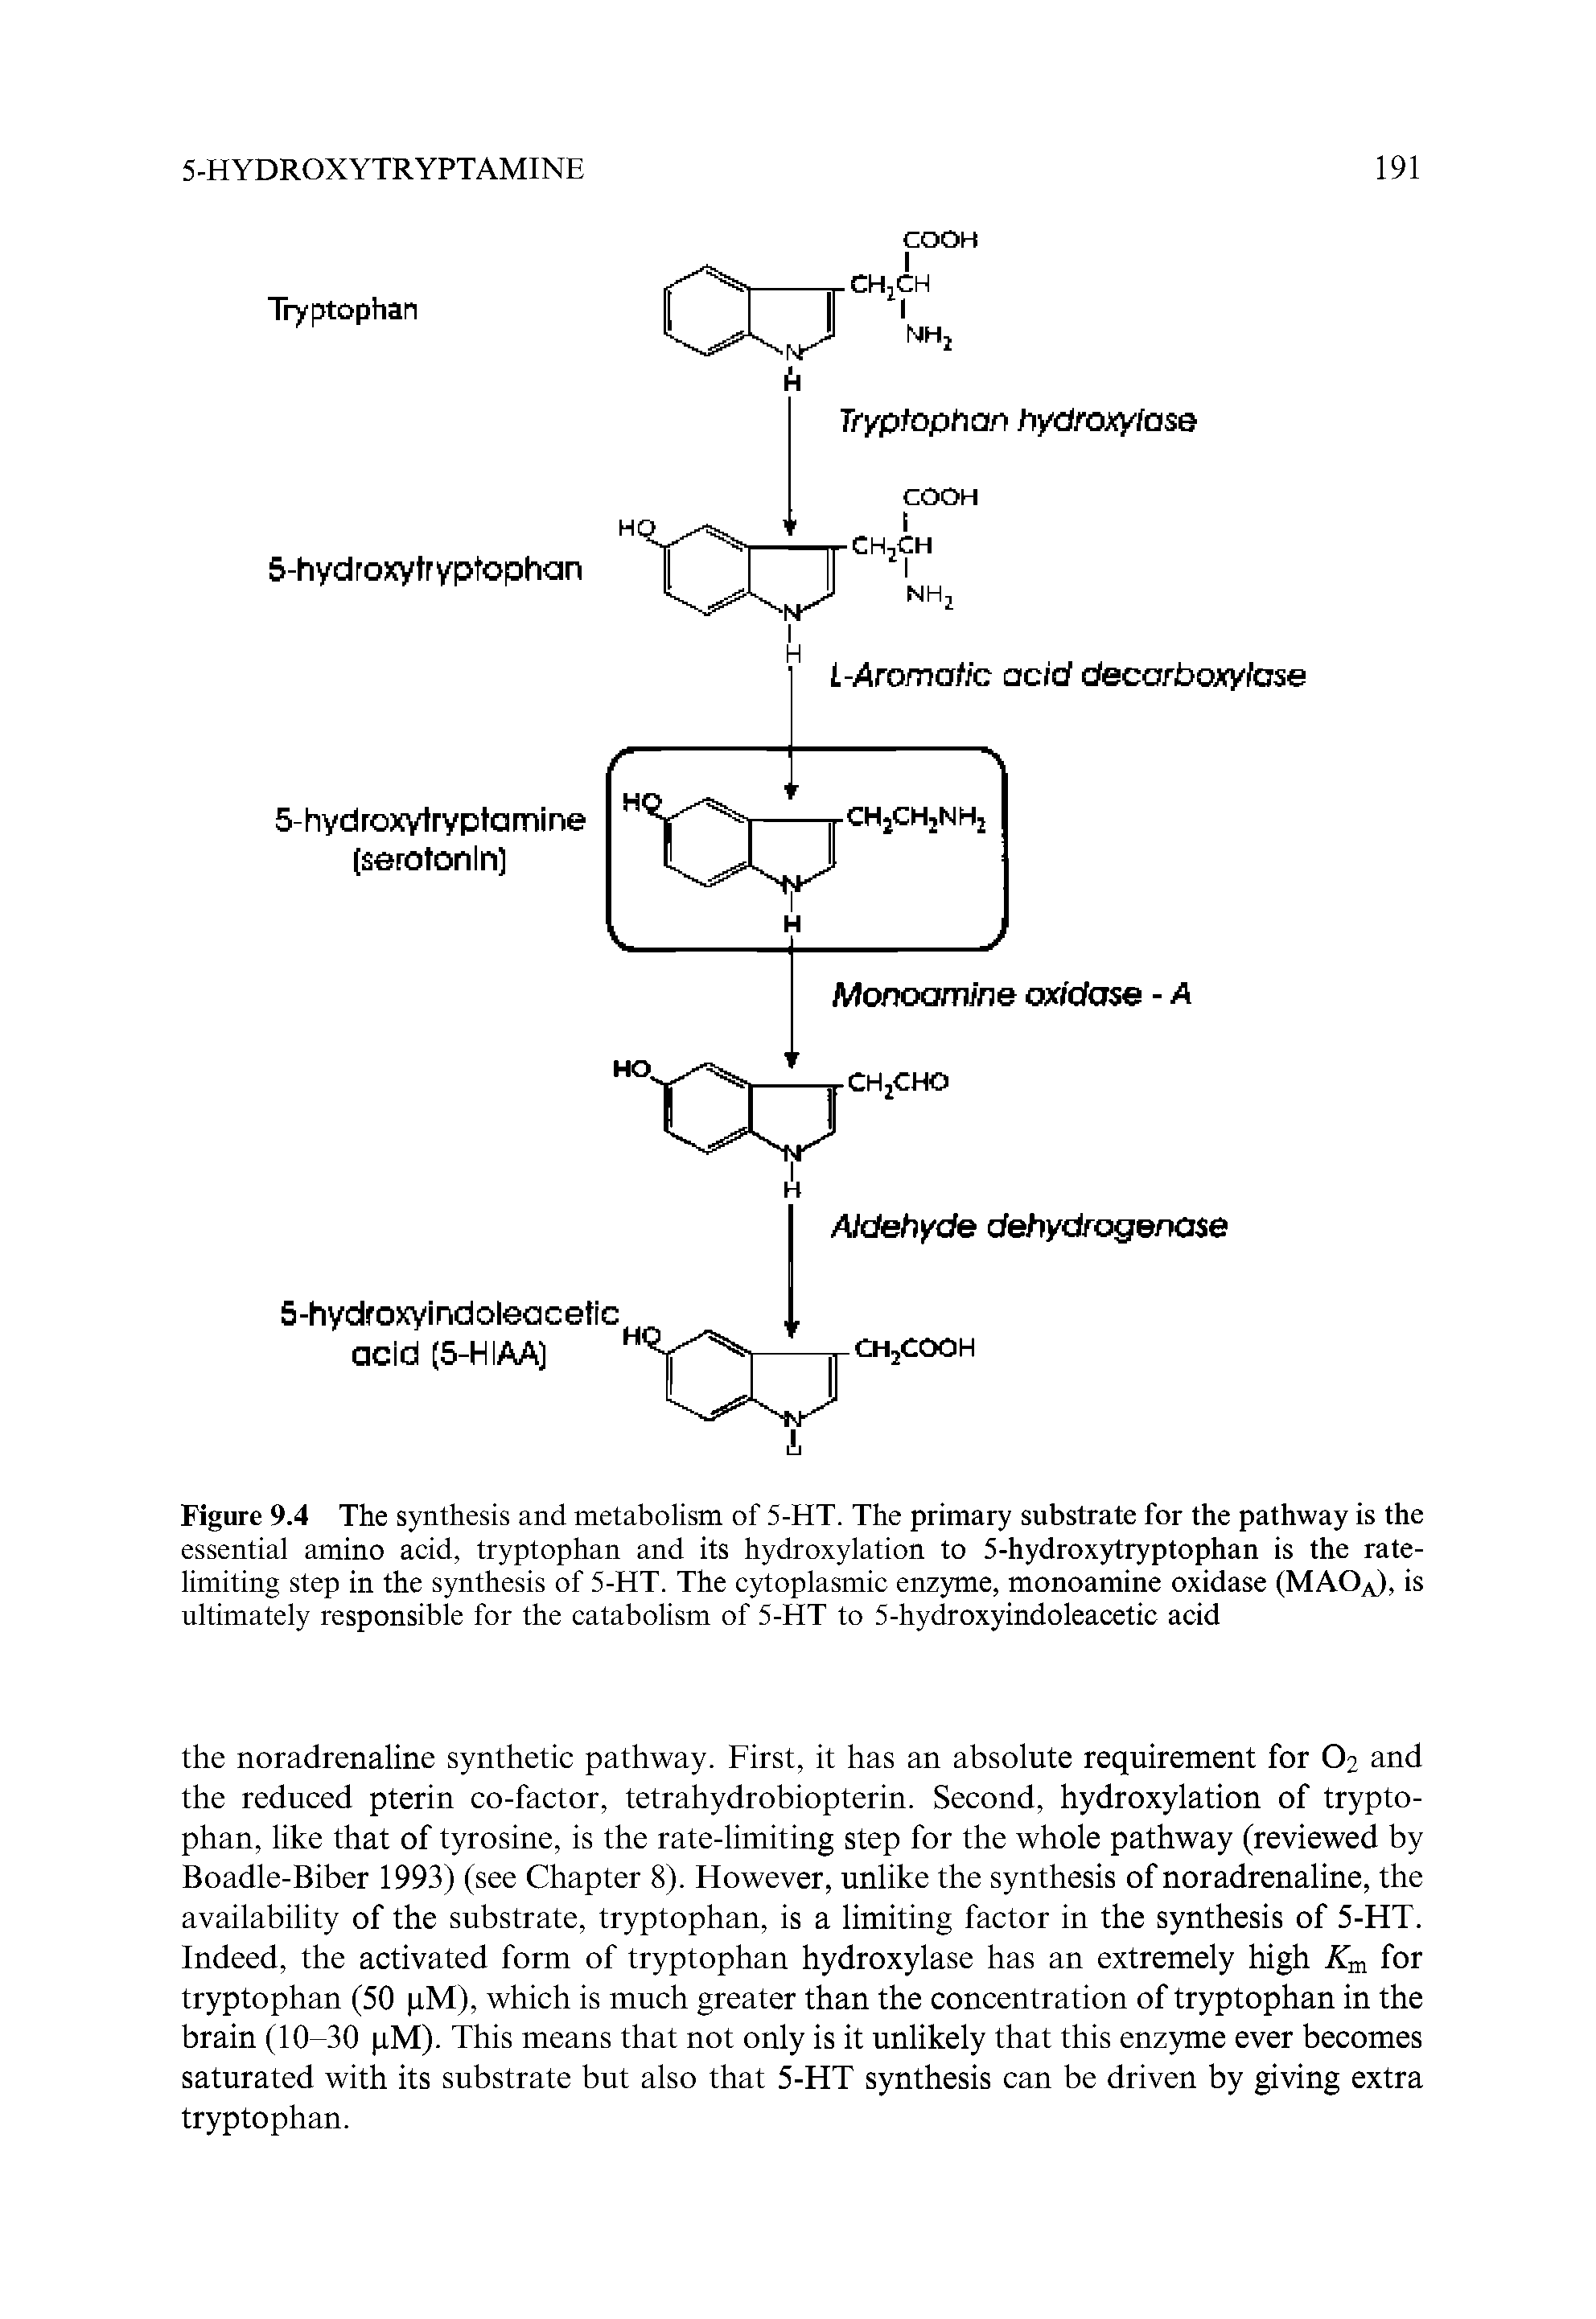 Figure 9.4 The synthesis and metabolism of 5-HT. The primary substrate for the pathway is the essential amino acid, tryptophan and its hydroxylation to 5-hydrox5dryptophan is the rate-limiting step in the synthesis of 5-HT. The cytoplasmic enzyme, monoamine oxidase (MAOa), is ultimately responsible for the catabolism of 5-HT to 5-hydroxyindoleacetic acid...